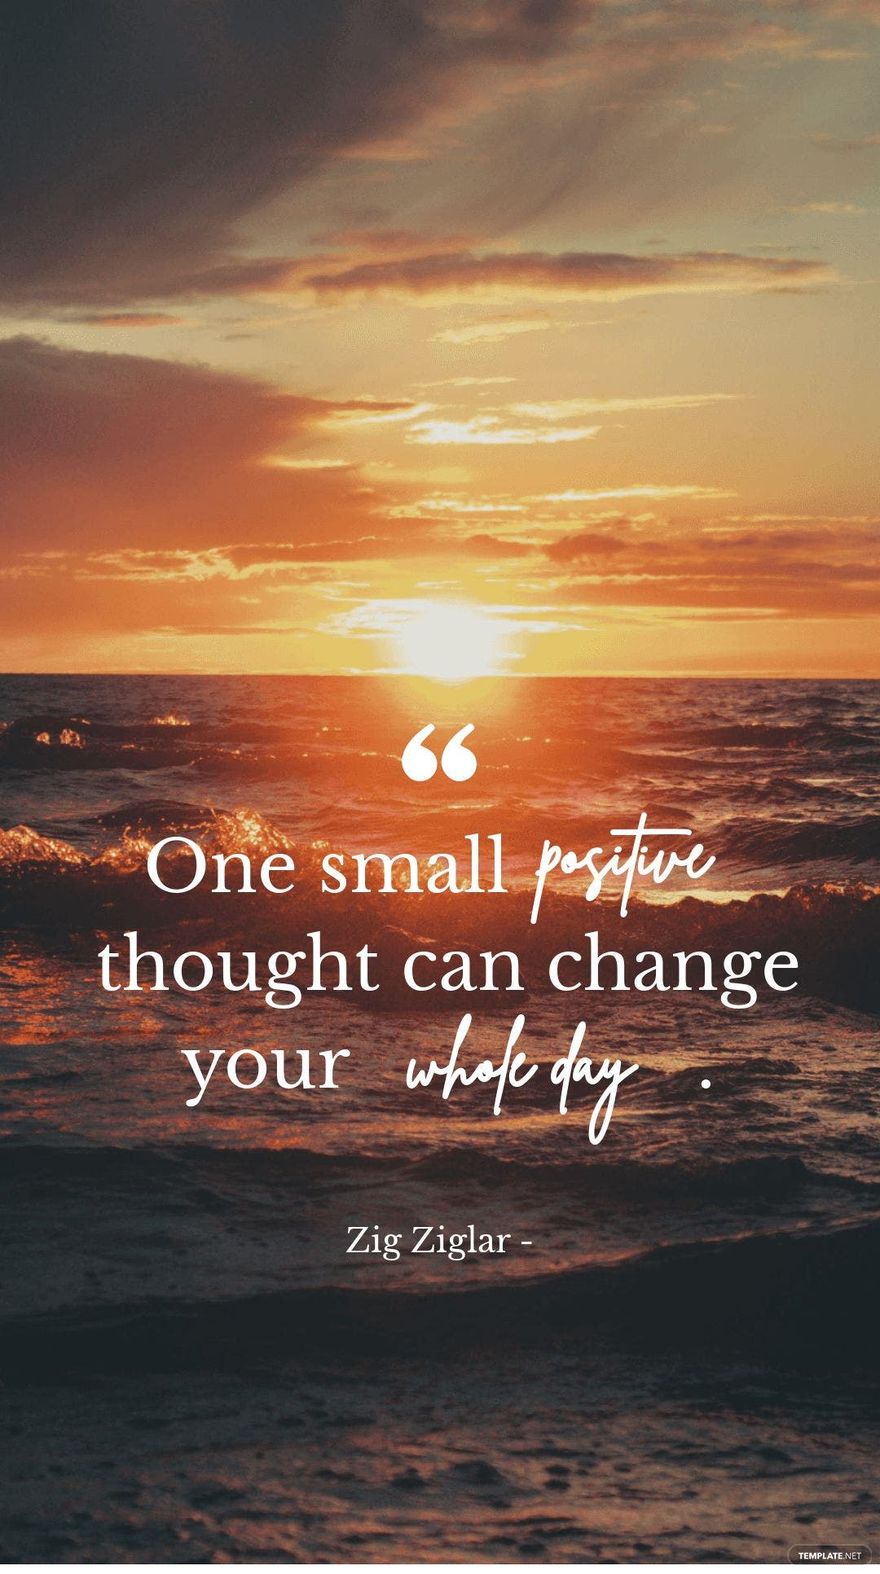 Zig Ziglar - One small positive thought can change your whole day.